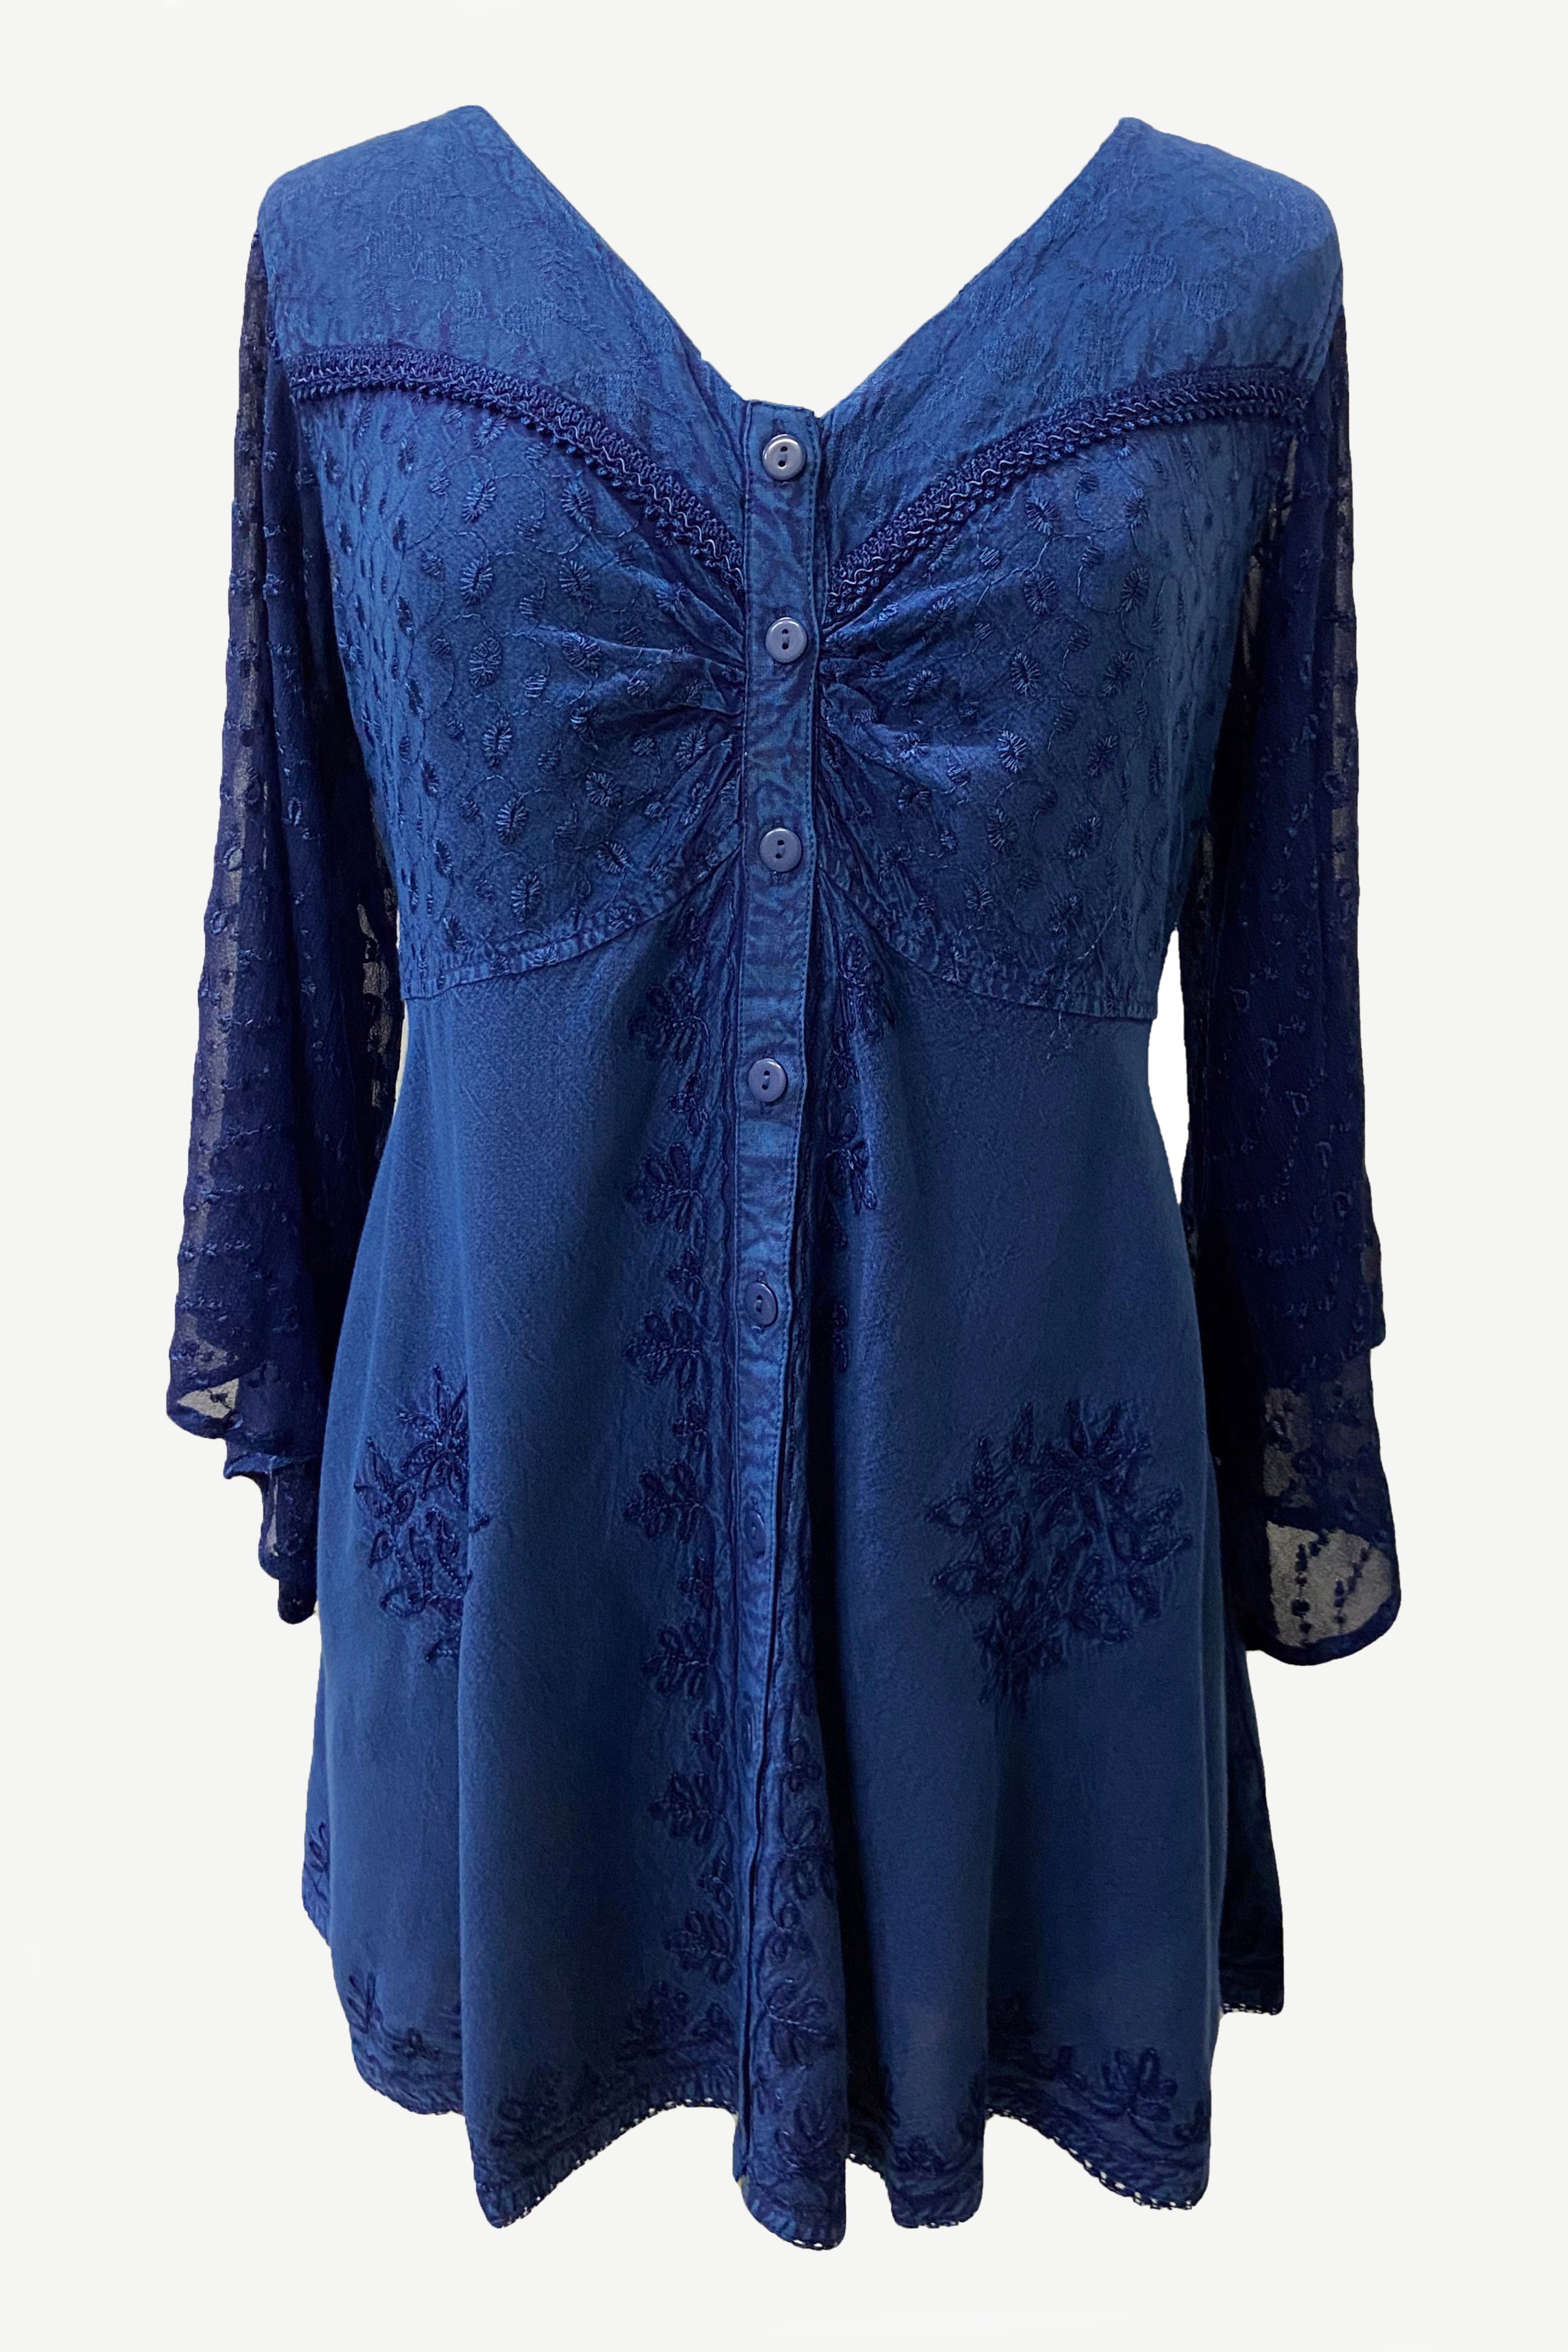 18 607 B Medieval Gothic Embroidered Button Down Sheer Lace Sleeve Top ...